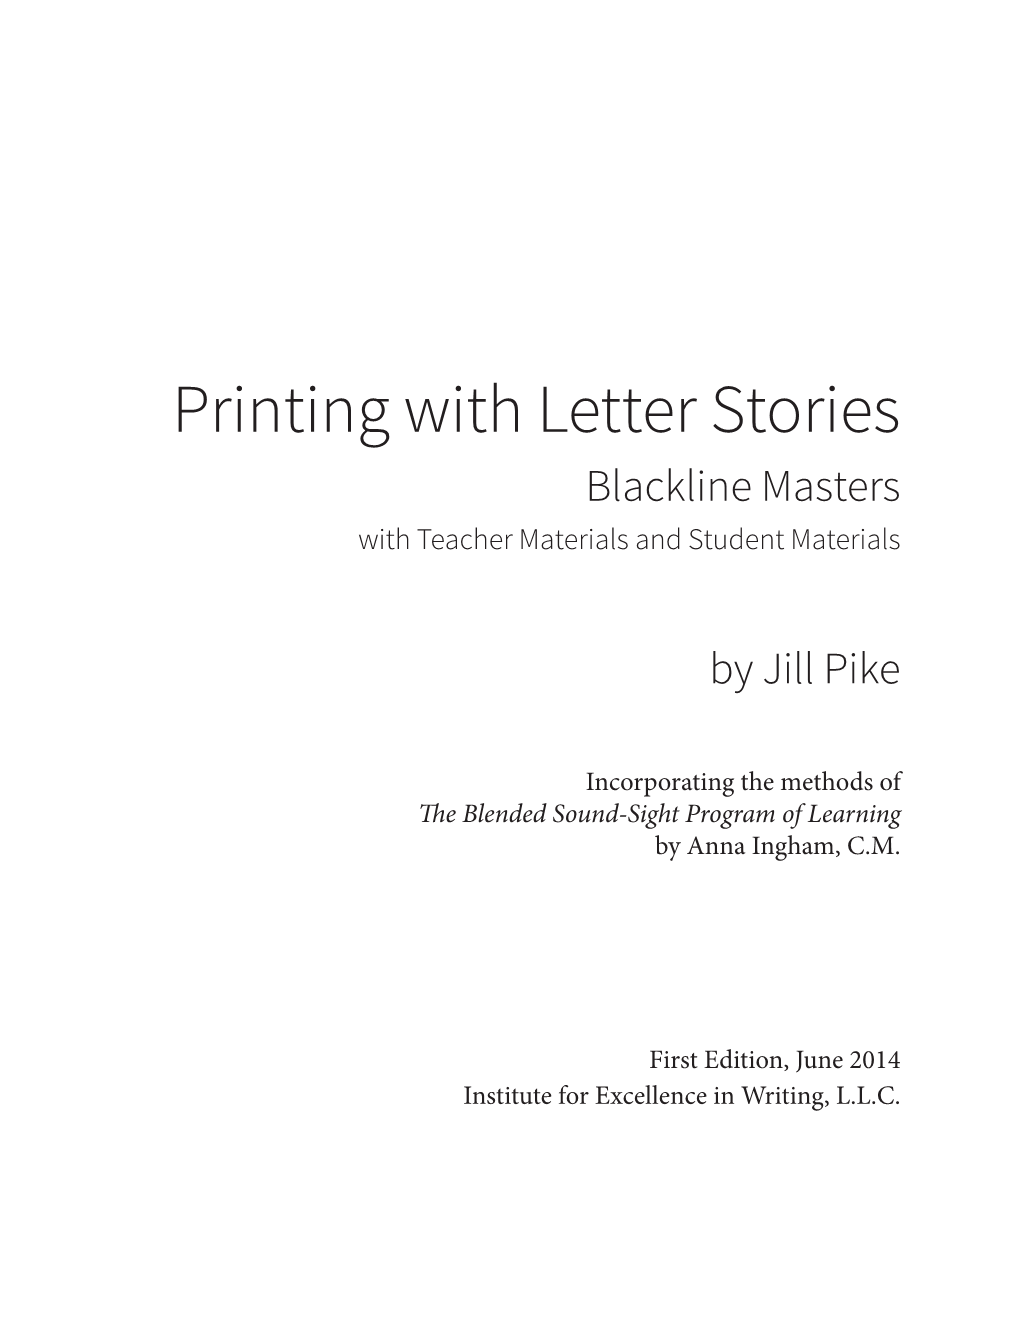 Sample from Printing with Letter Stories